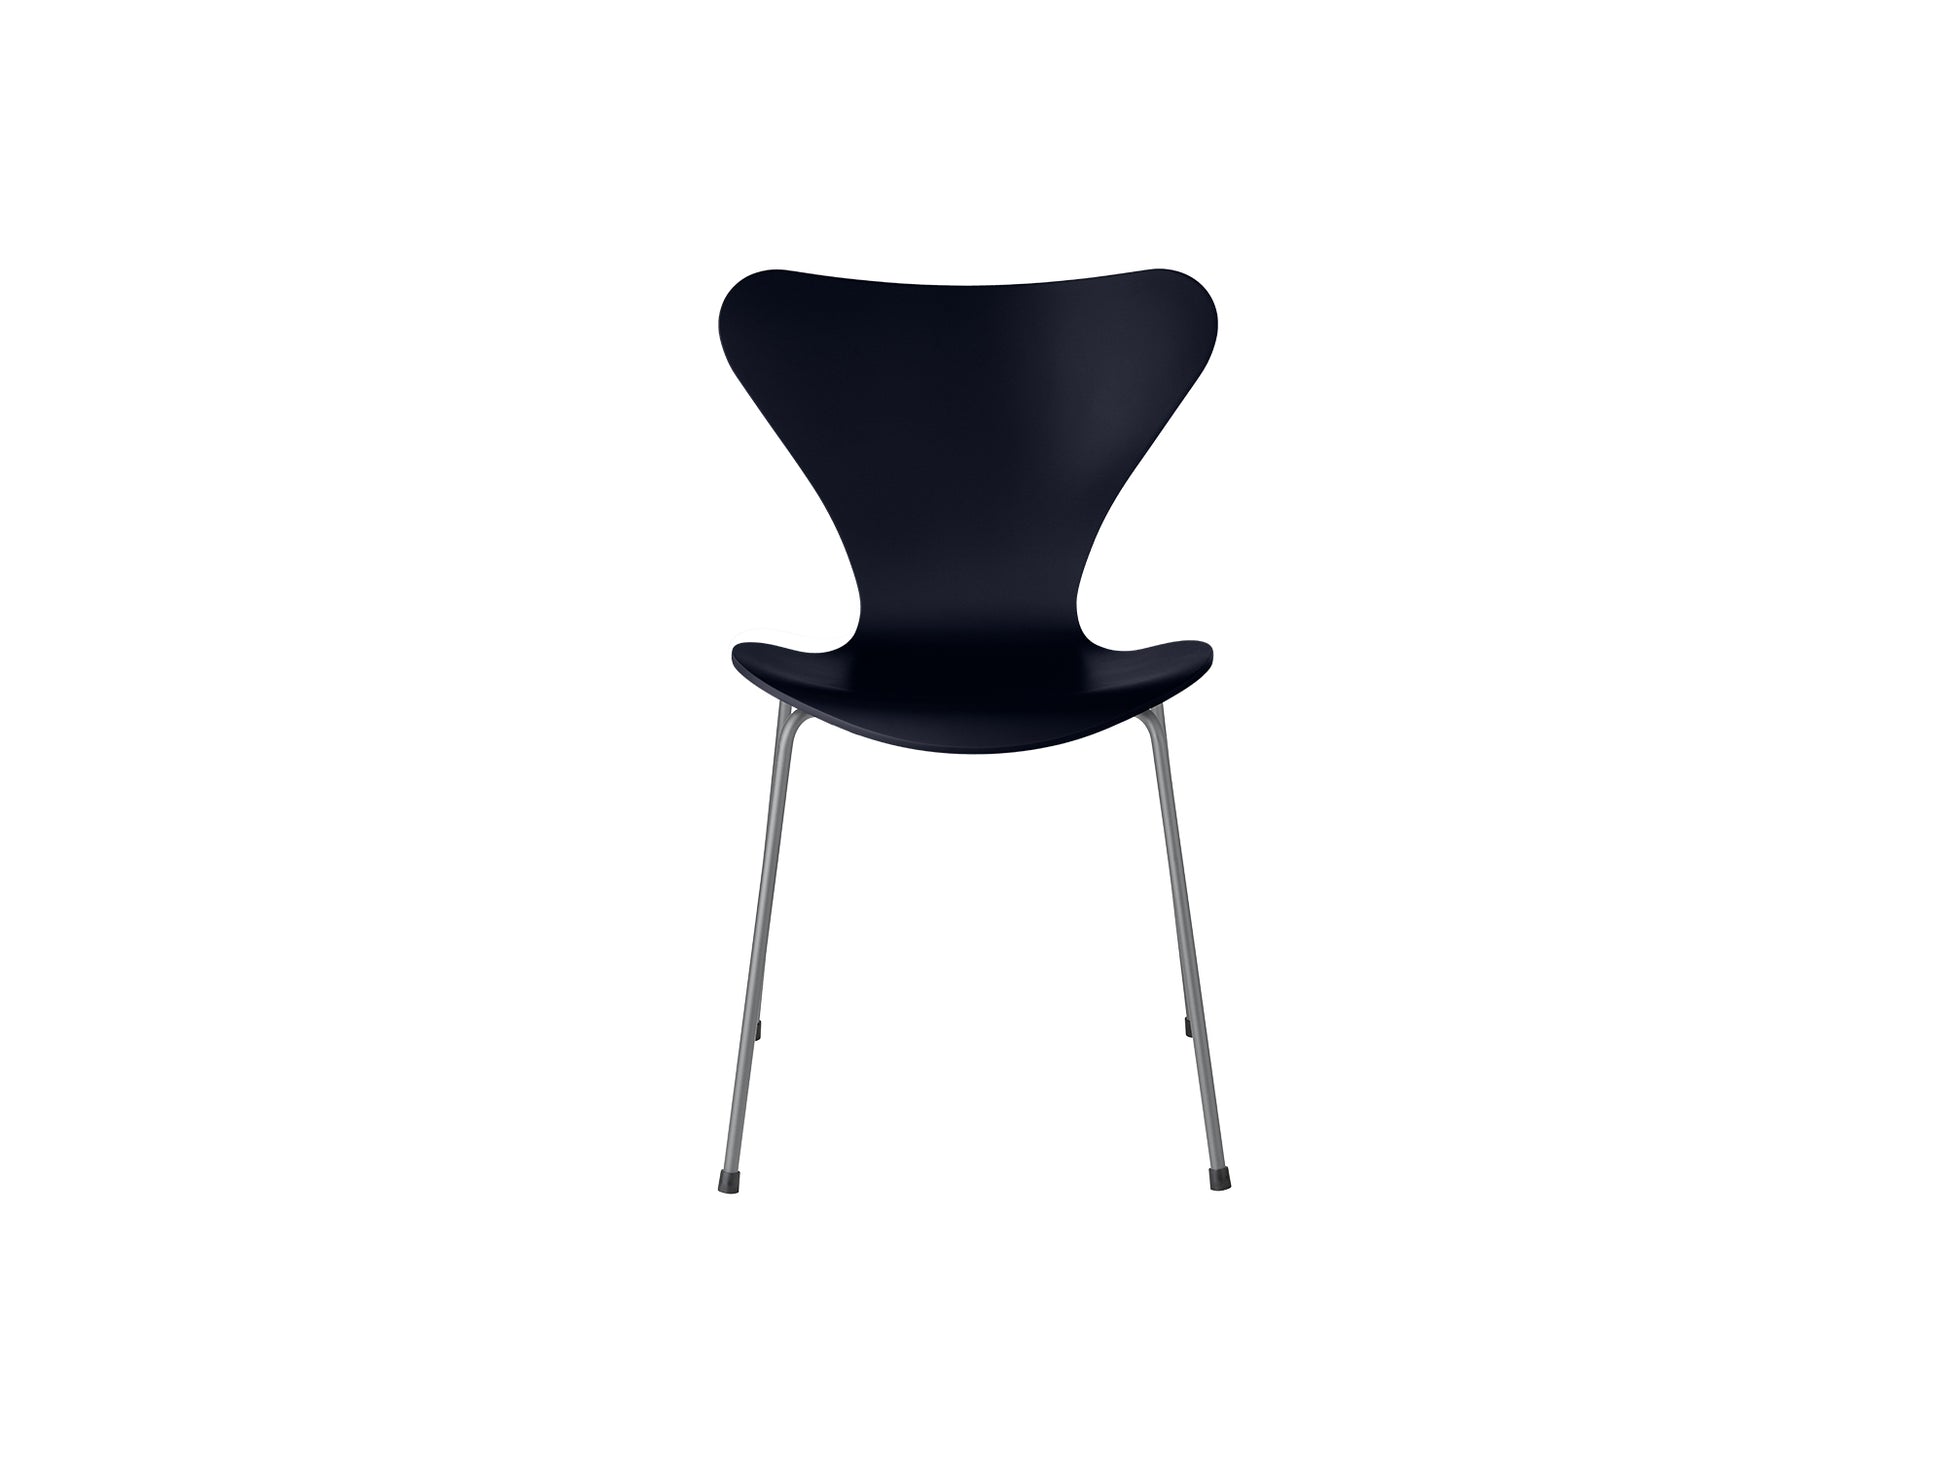 Series 7™ 3107 Dining Chair by Fritz Hansen - Midnight Blue Lacquered Veneer Shell / Silver Grey Steel